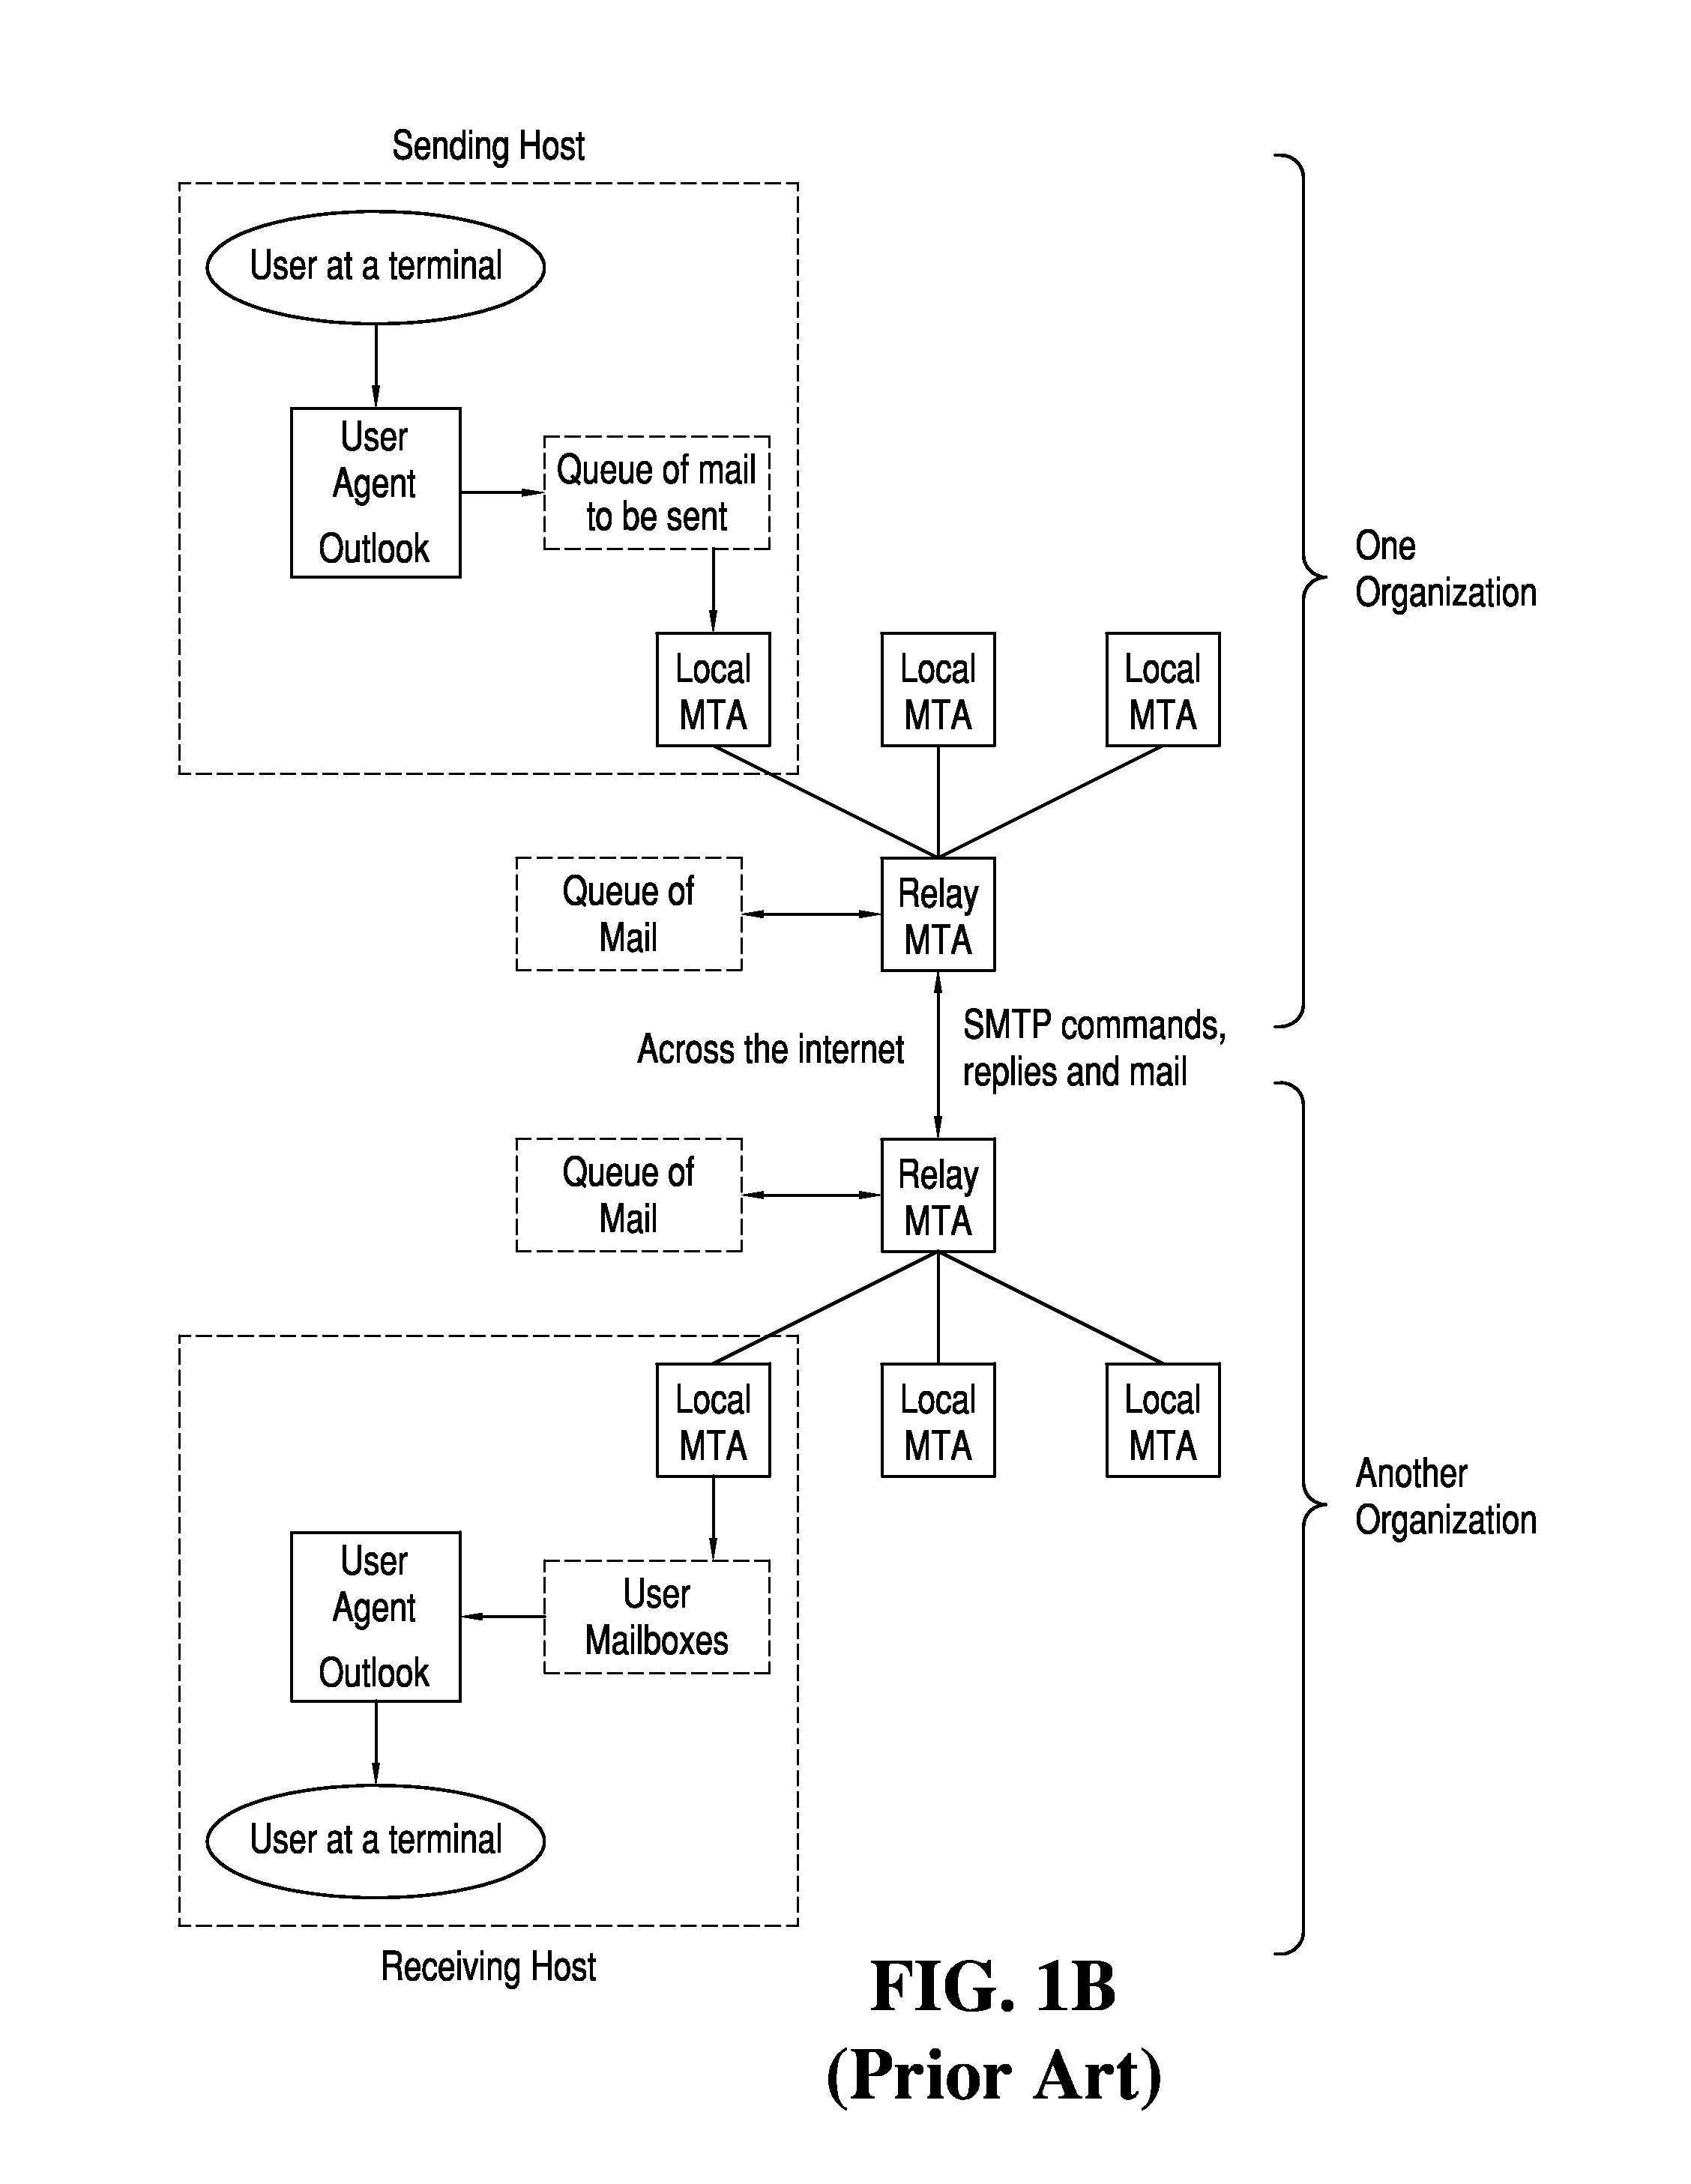 Method and system for adaptive delivery of digital messages